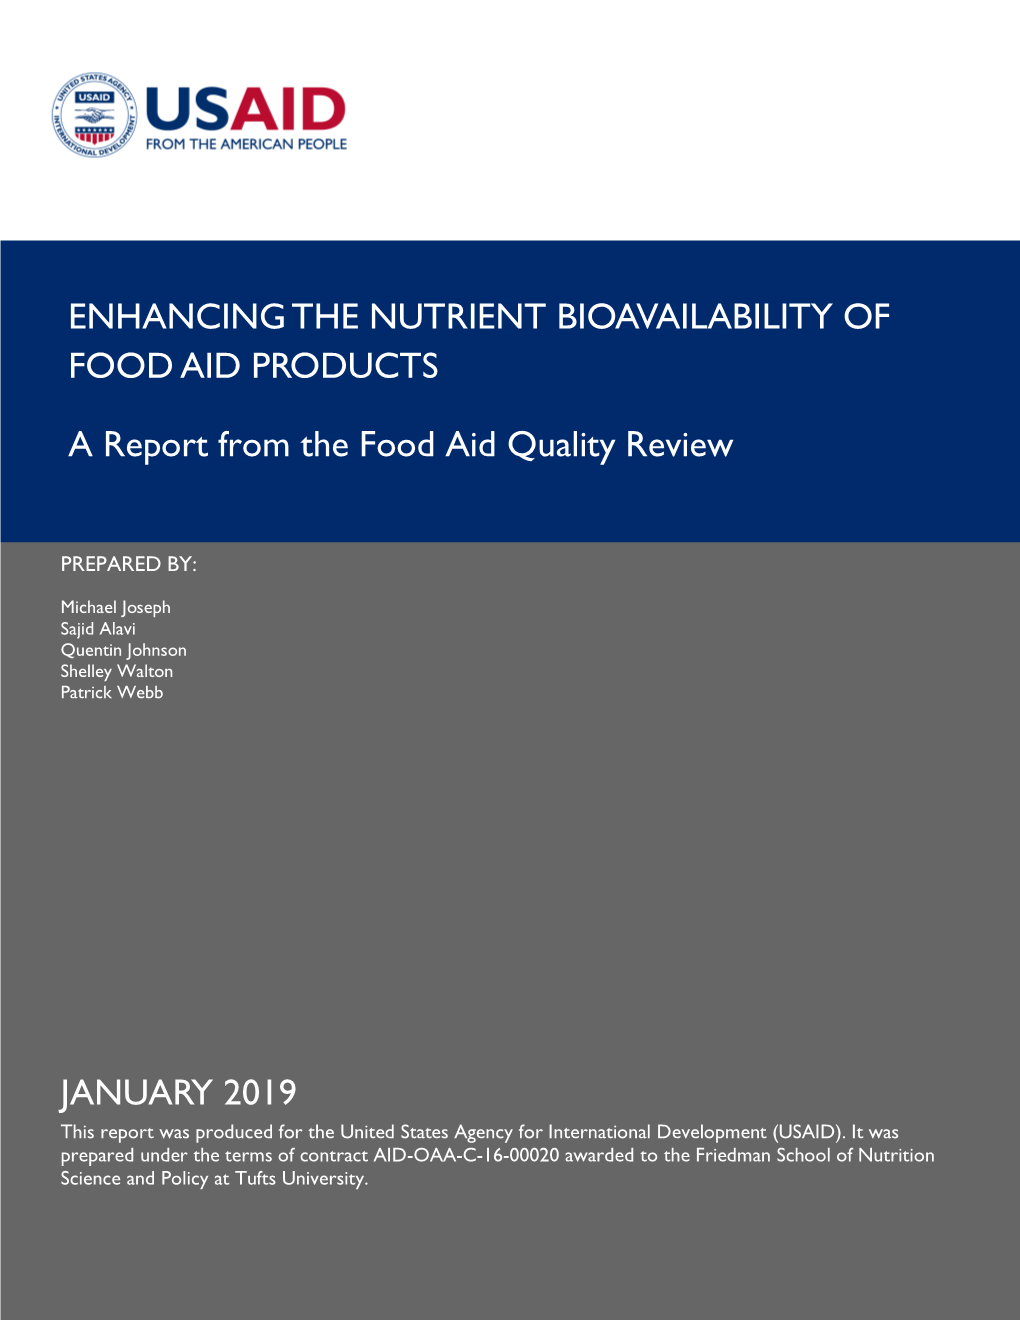 ENHANCING the NUTRIENT BIOAVAILABILITY of FOOD AID PRODUCTS a Report from the Food Aid Quality Review JANUARY 2019